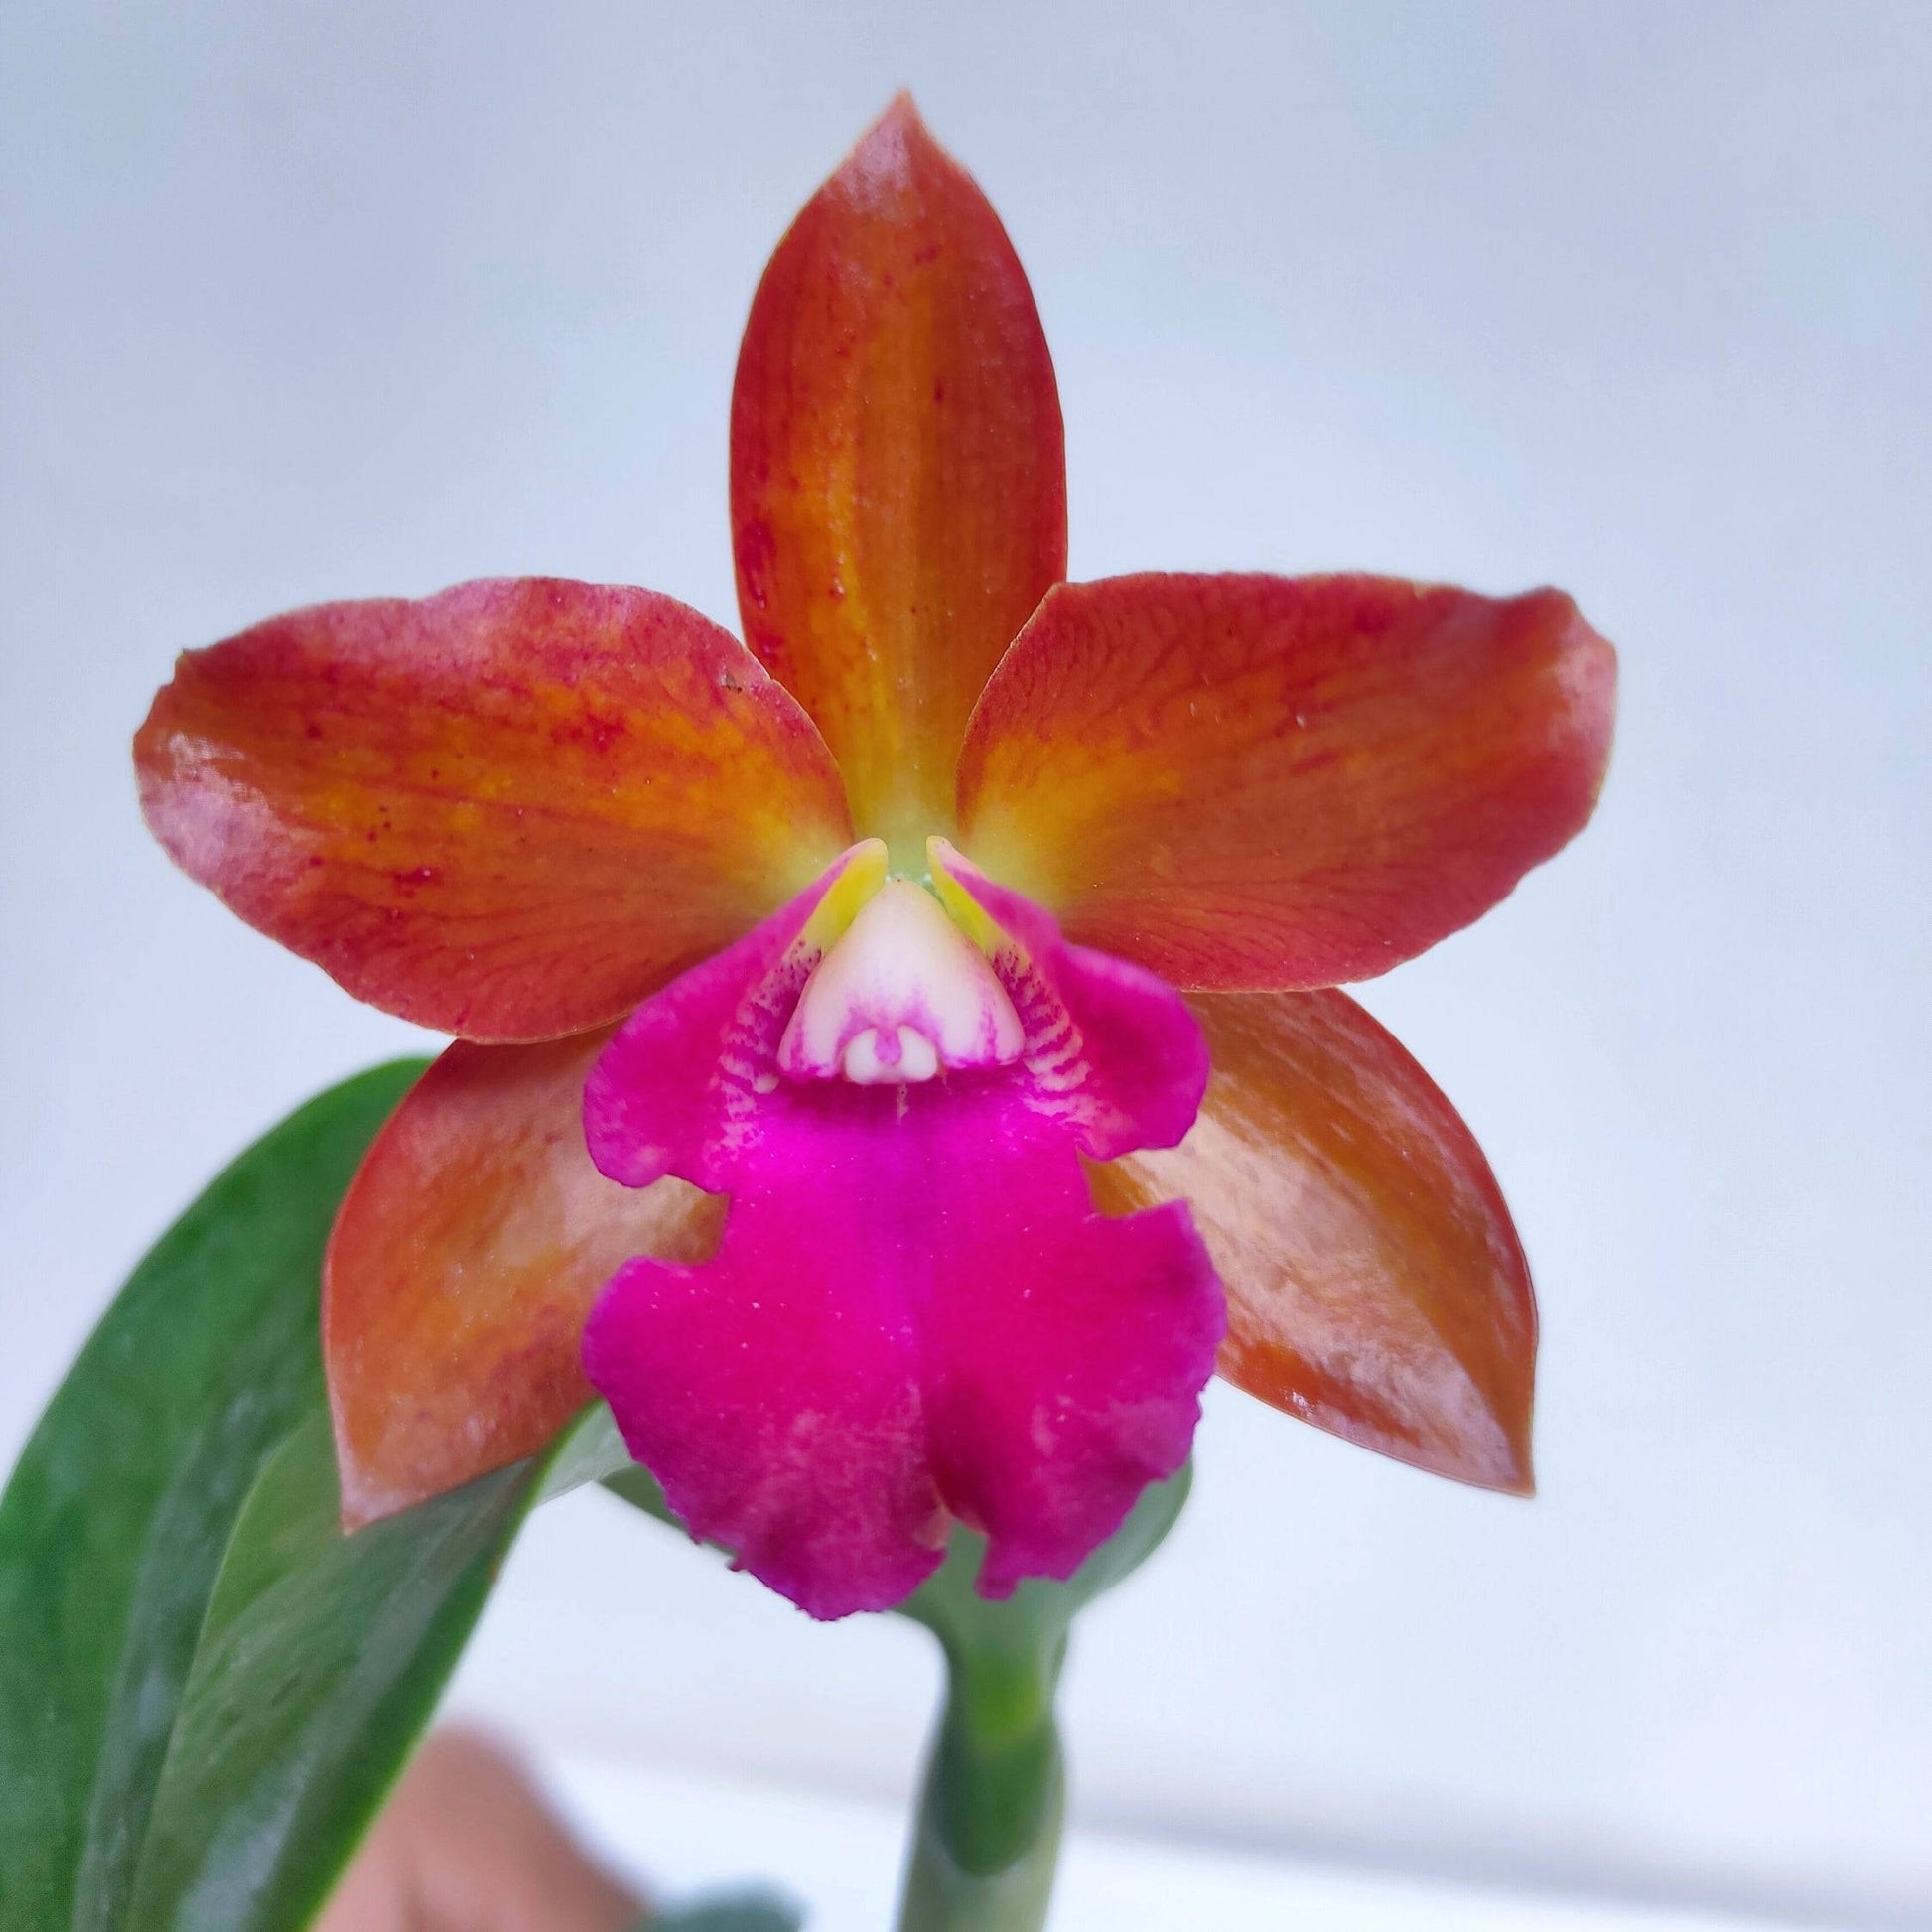 Cattleya Loog Tone Red - Without Flowers | BS - Buy Orchids Plants Online by Orchid-Tree.com